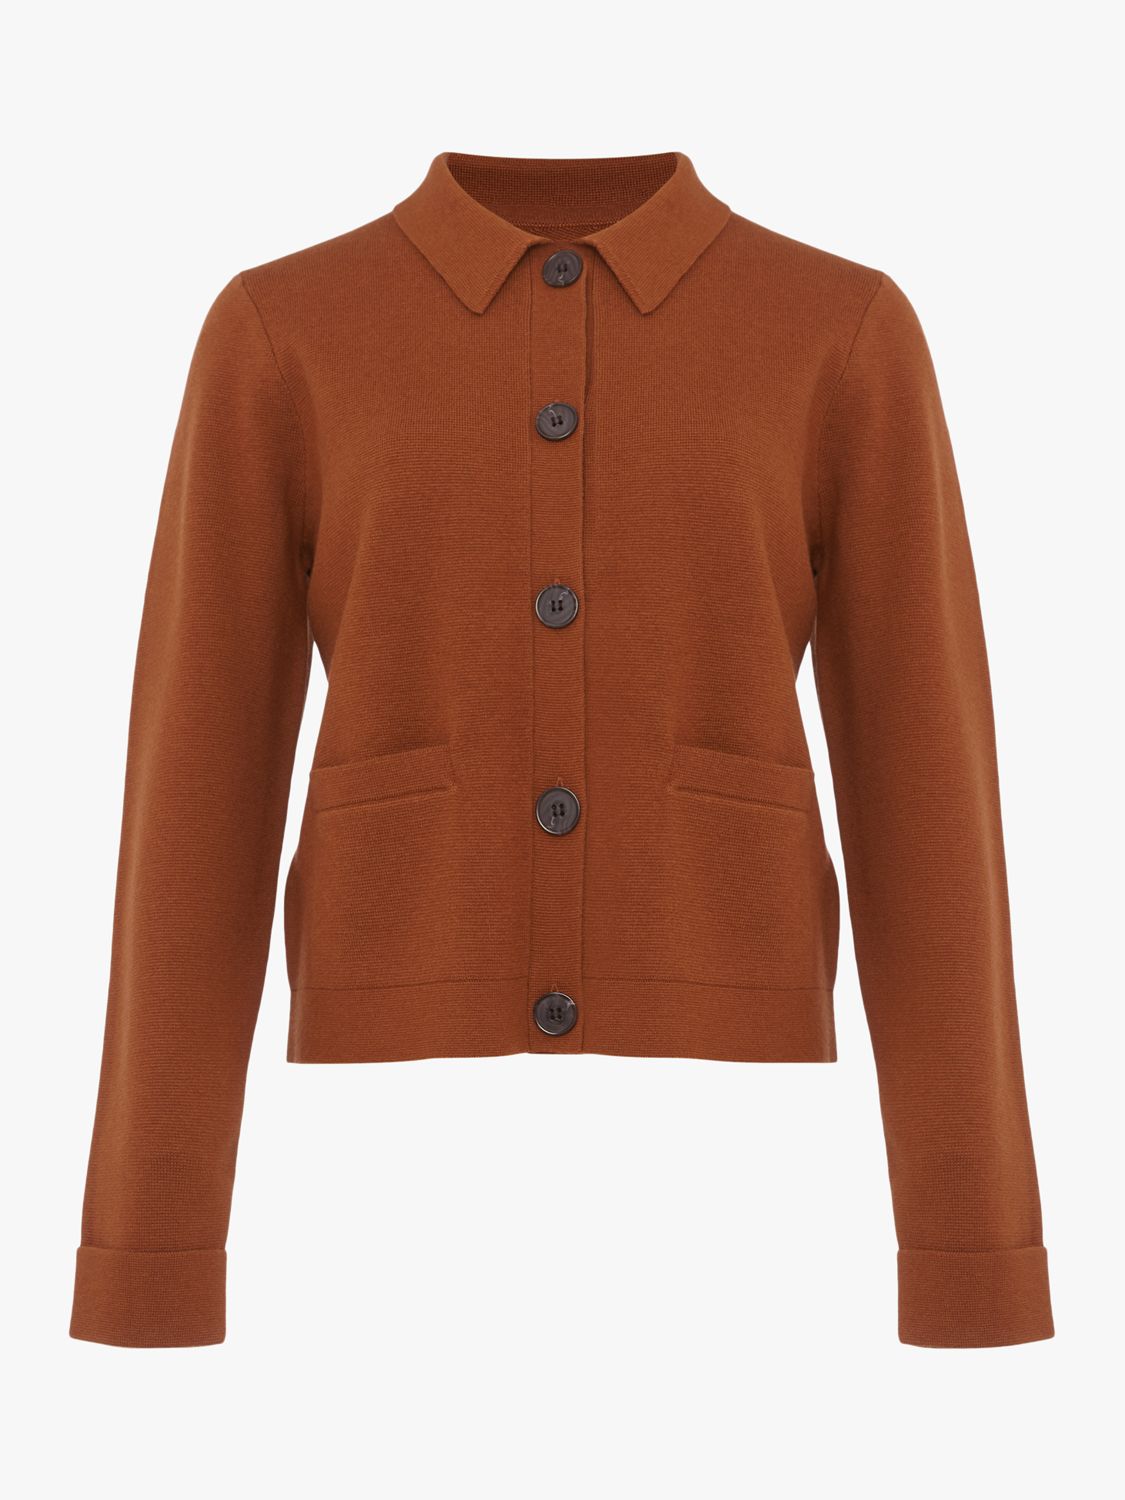 Hobbs Knitted Jacket, Toffee at John Lewis & Partners